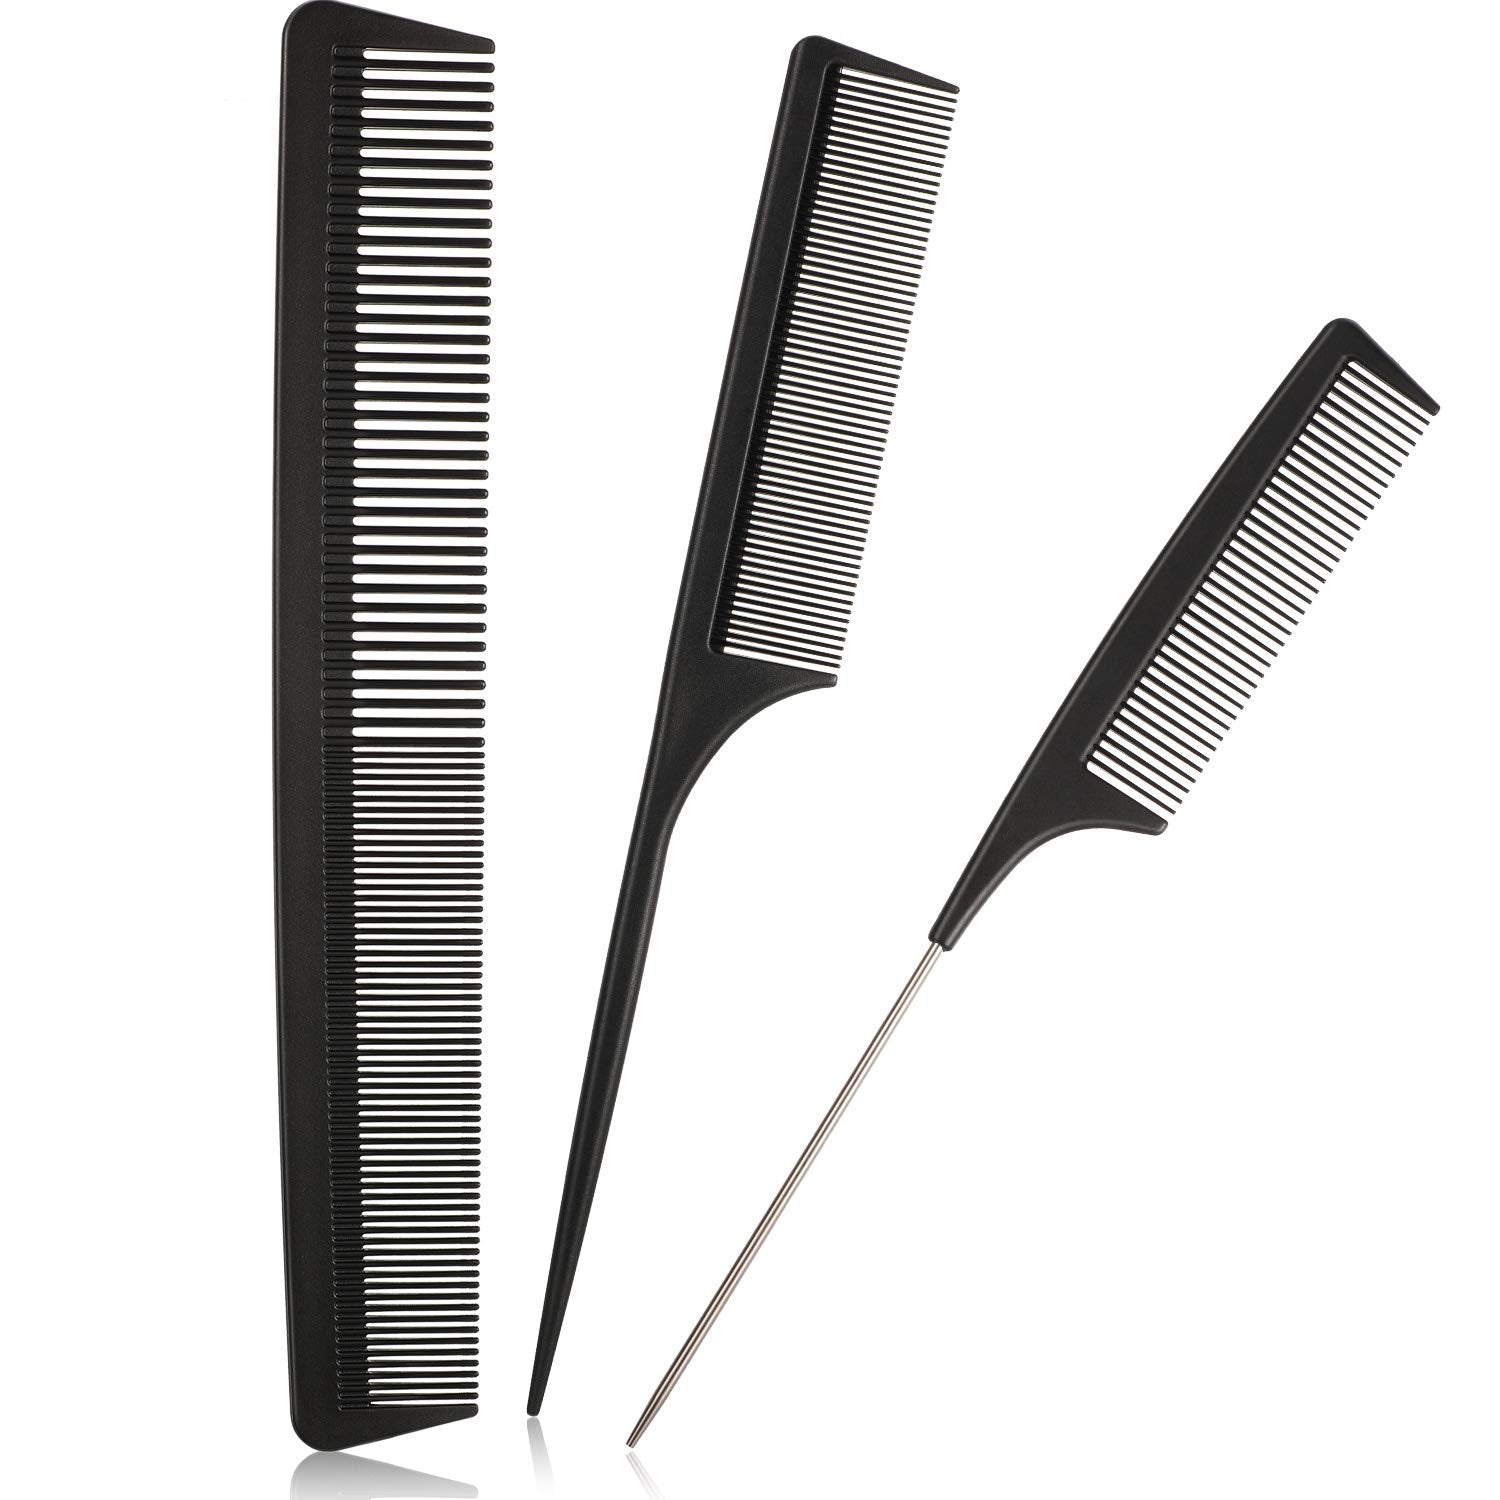 3 Pieces Tail Combs Set Carbon Styling Comb Fiber Rat Tail Comb Anti Static Heat Resistant Barber Hairdressing Comb Steel Pintail Comb Cutting Fine Tooth Comb Teasing Hair Comb for Women Men, Black